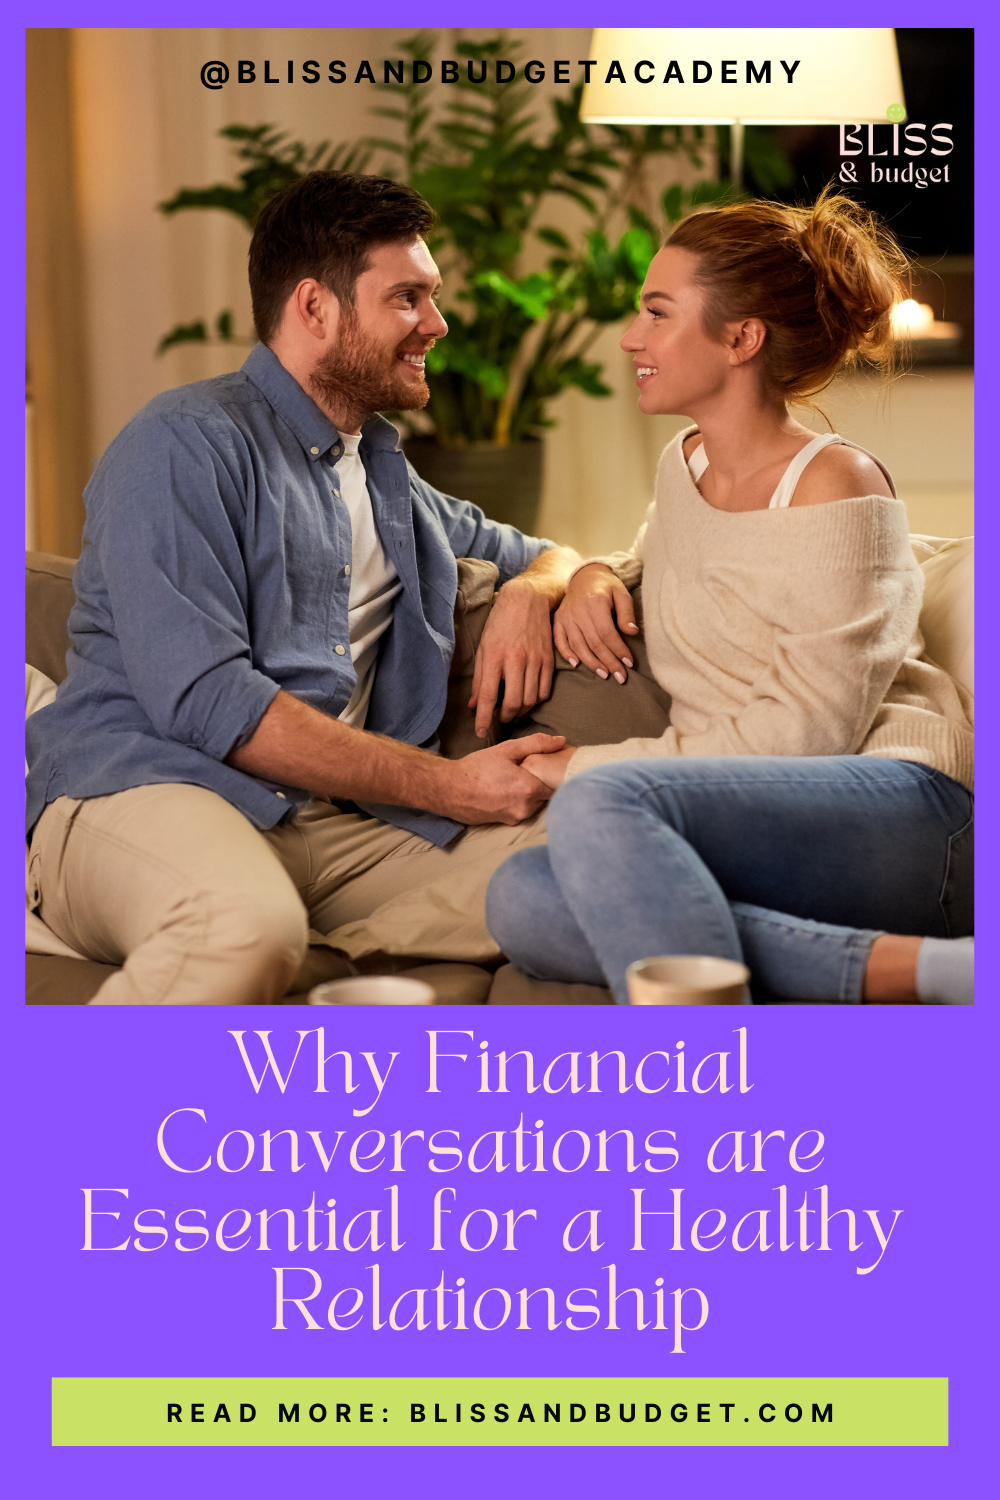 Why Financial Conversations are Essential for a Healthy Relationship